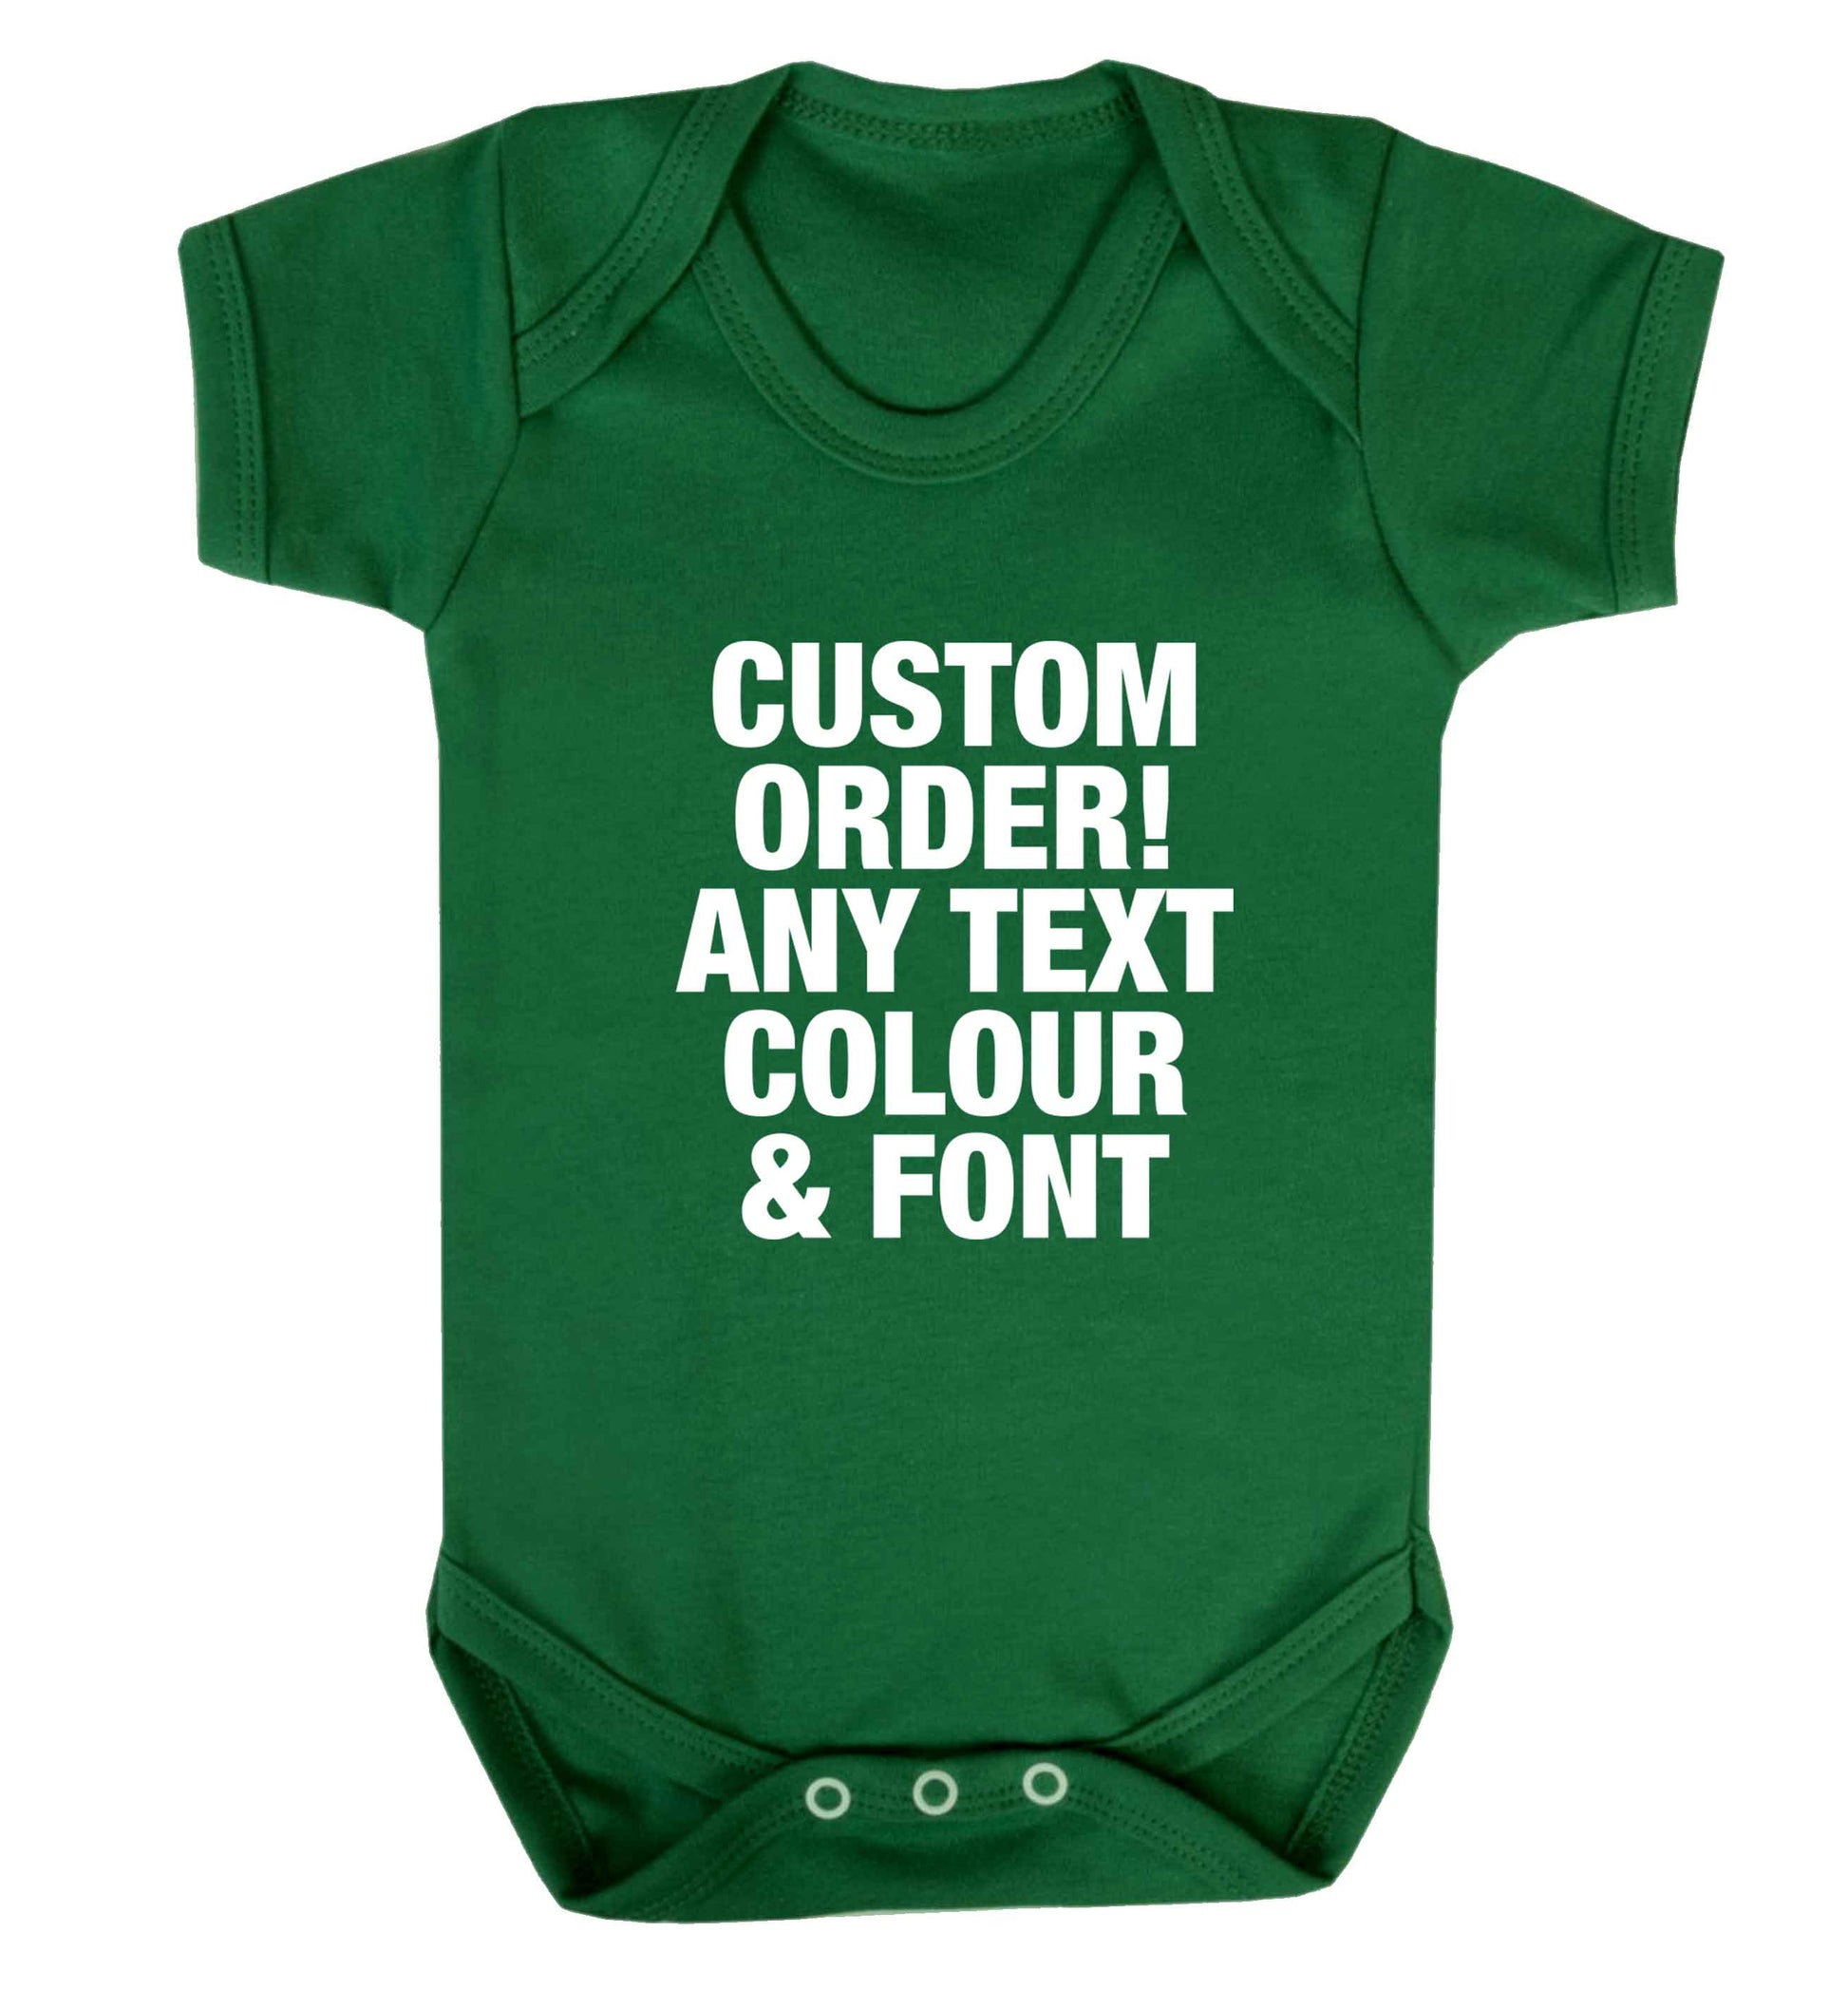 Custom order any text colour and font baby vest green 18-24 months